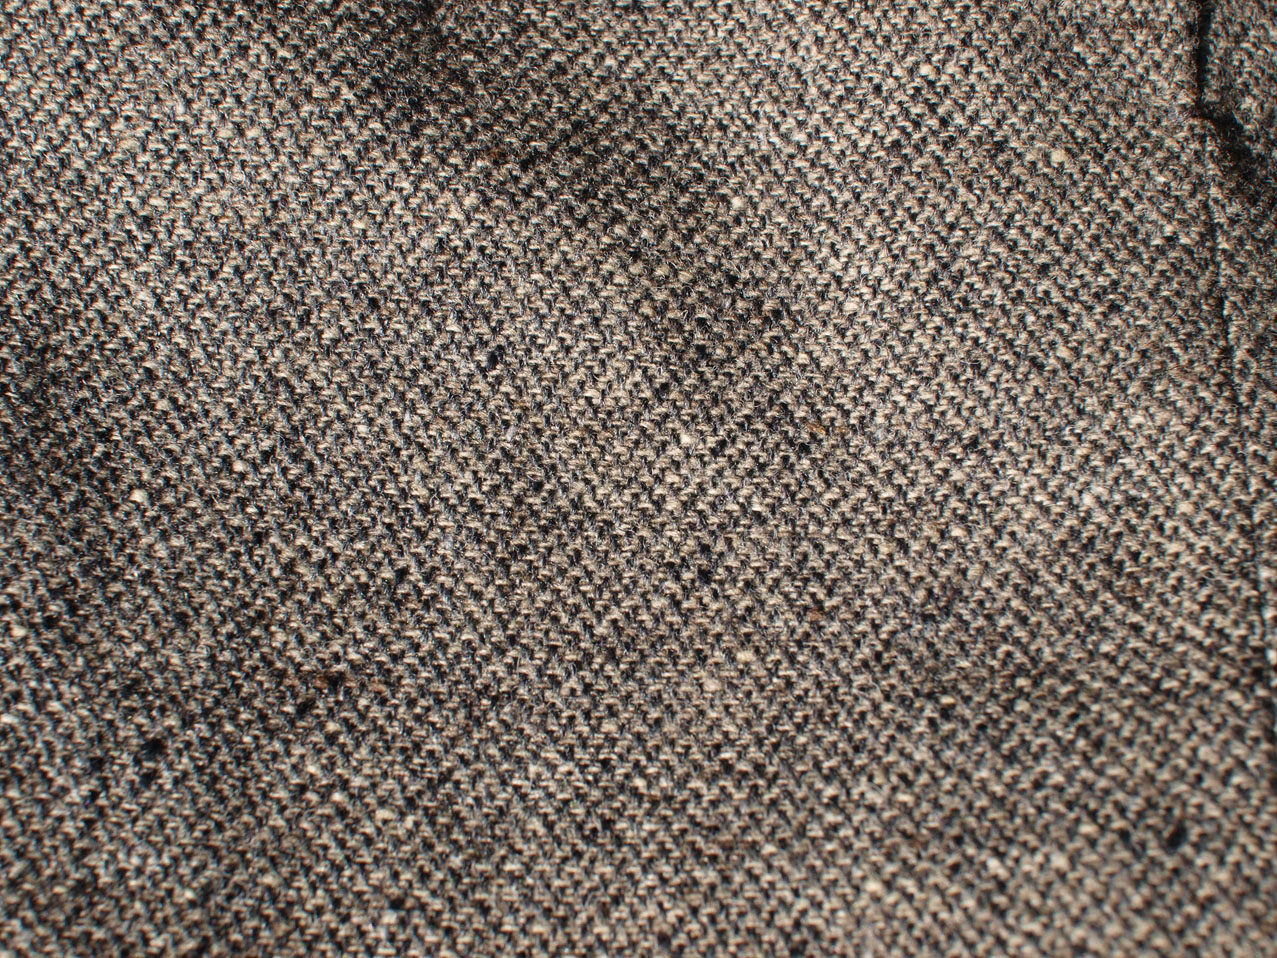 Wool texture background image